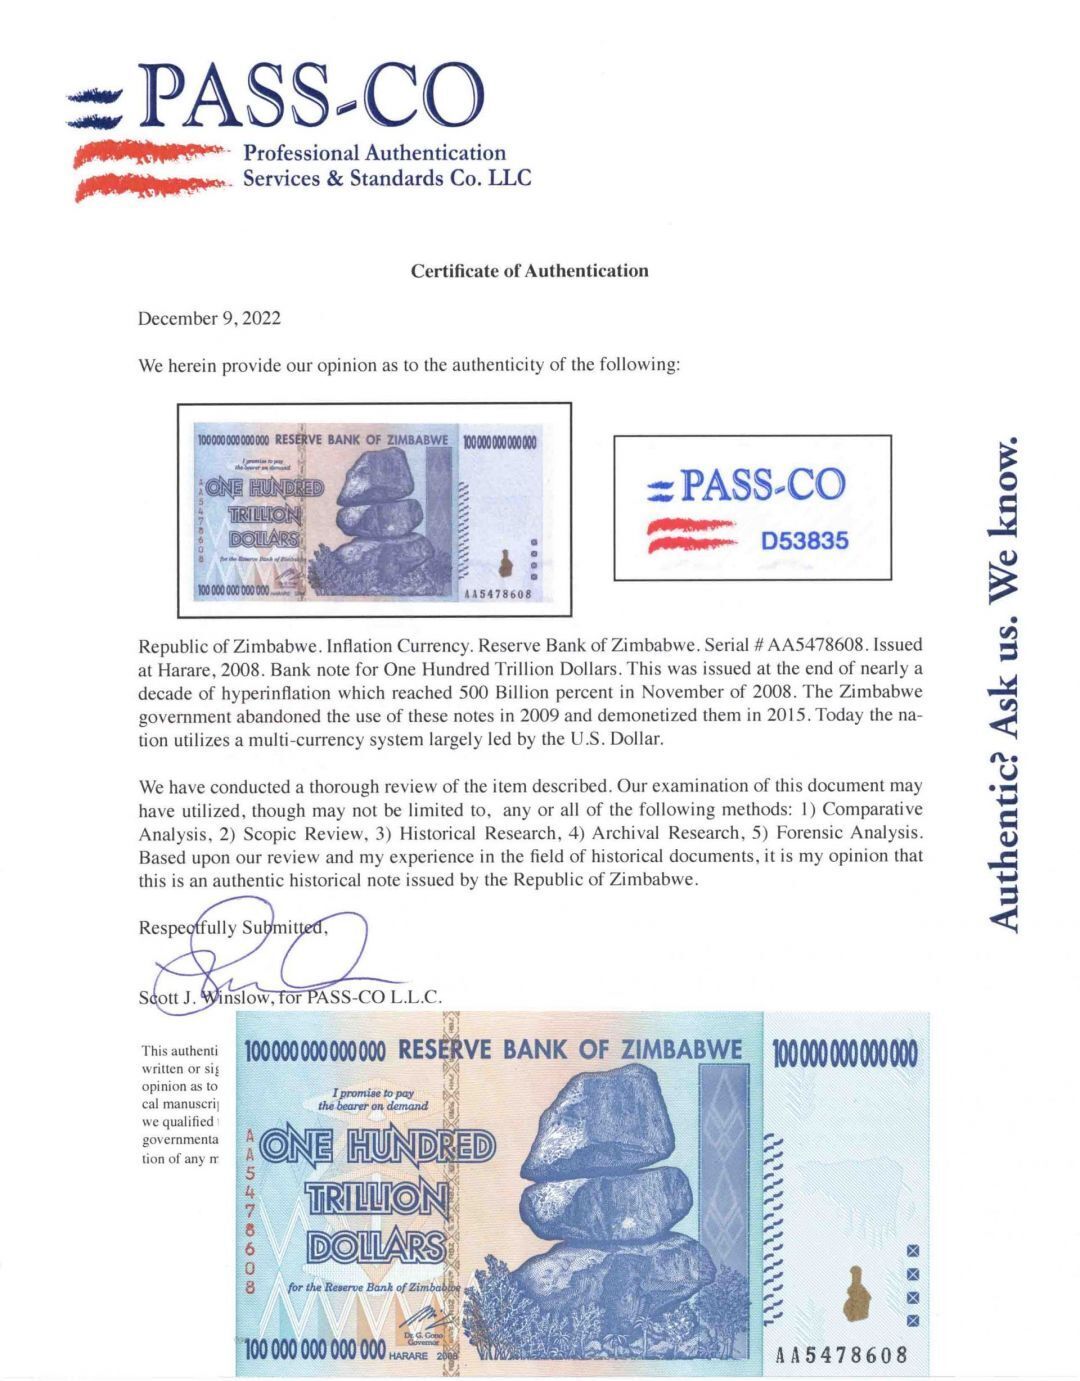 AA Zimbabwe 100 Trillion Dollar Blue 2008 dated Note with PASS-CO AUTHENTICATION